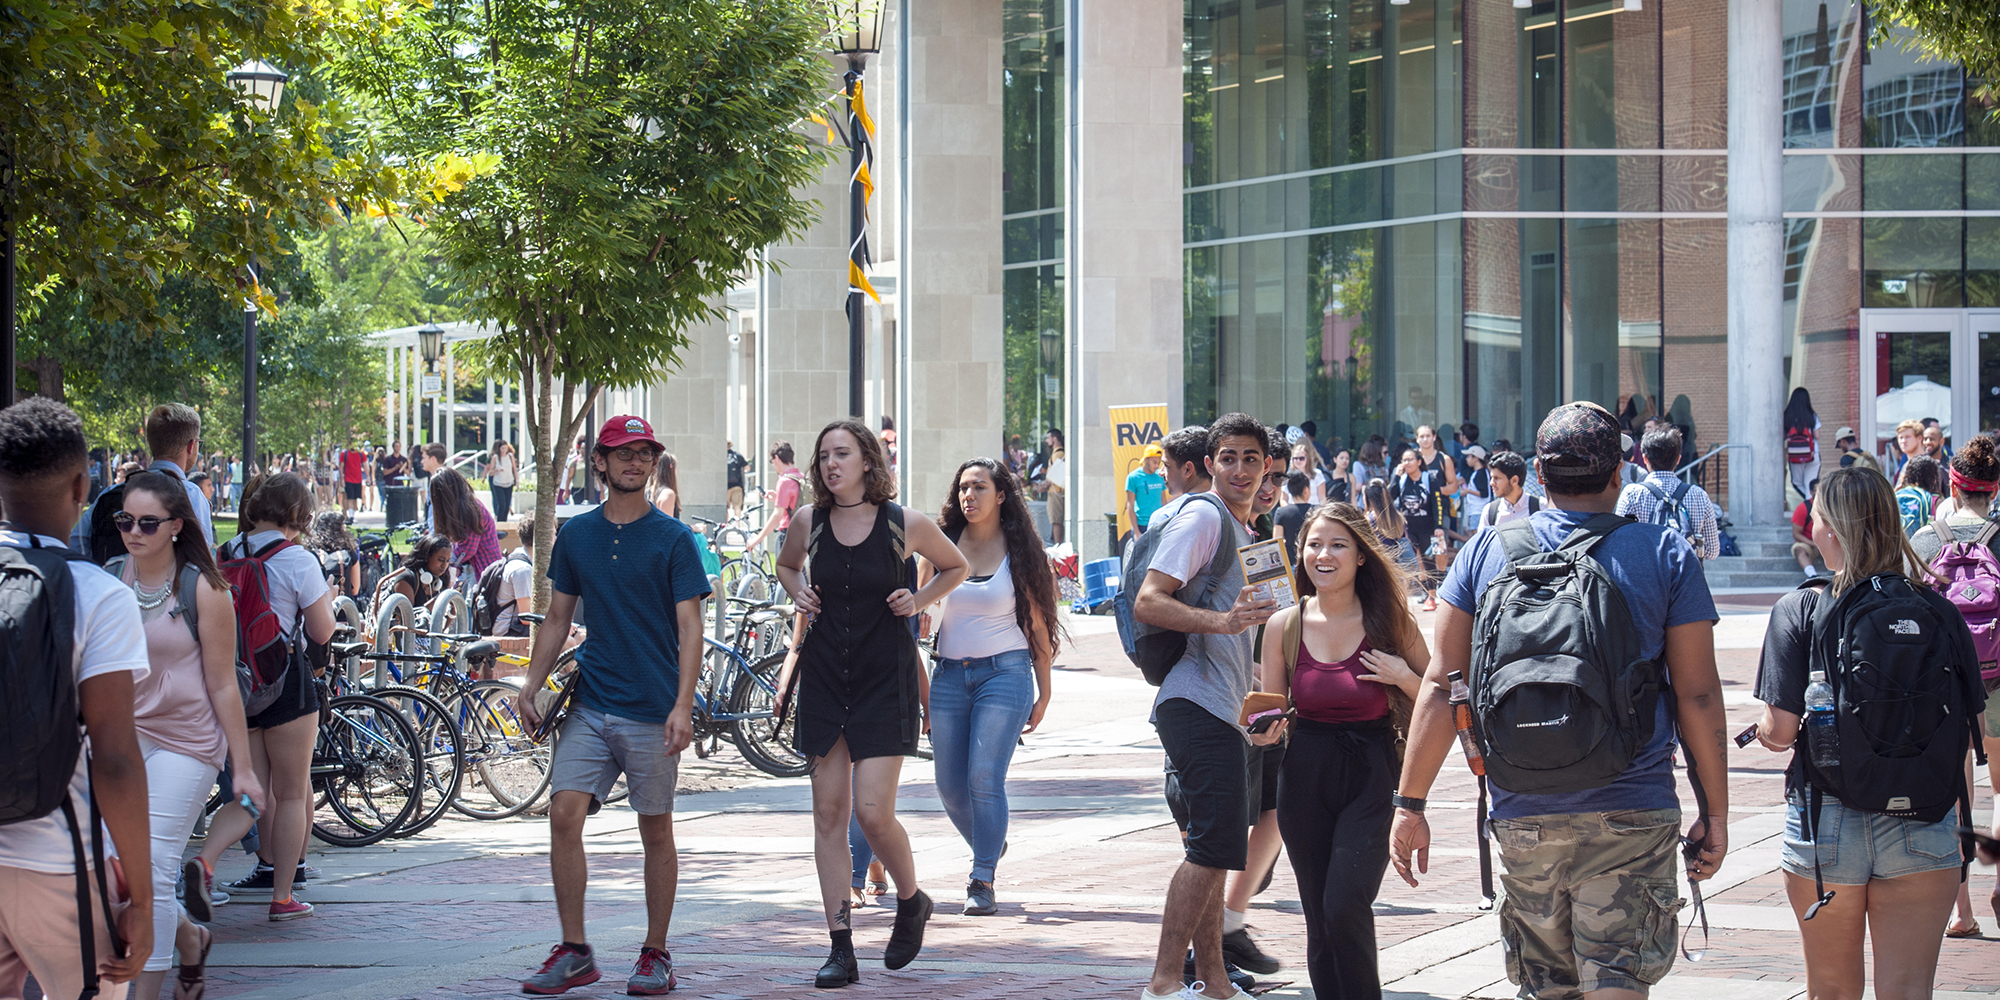 First Day of Classes, students at the VCU Compass Plaza, James Branch Cabell Library in background